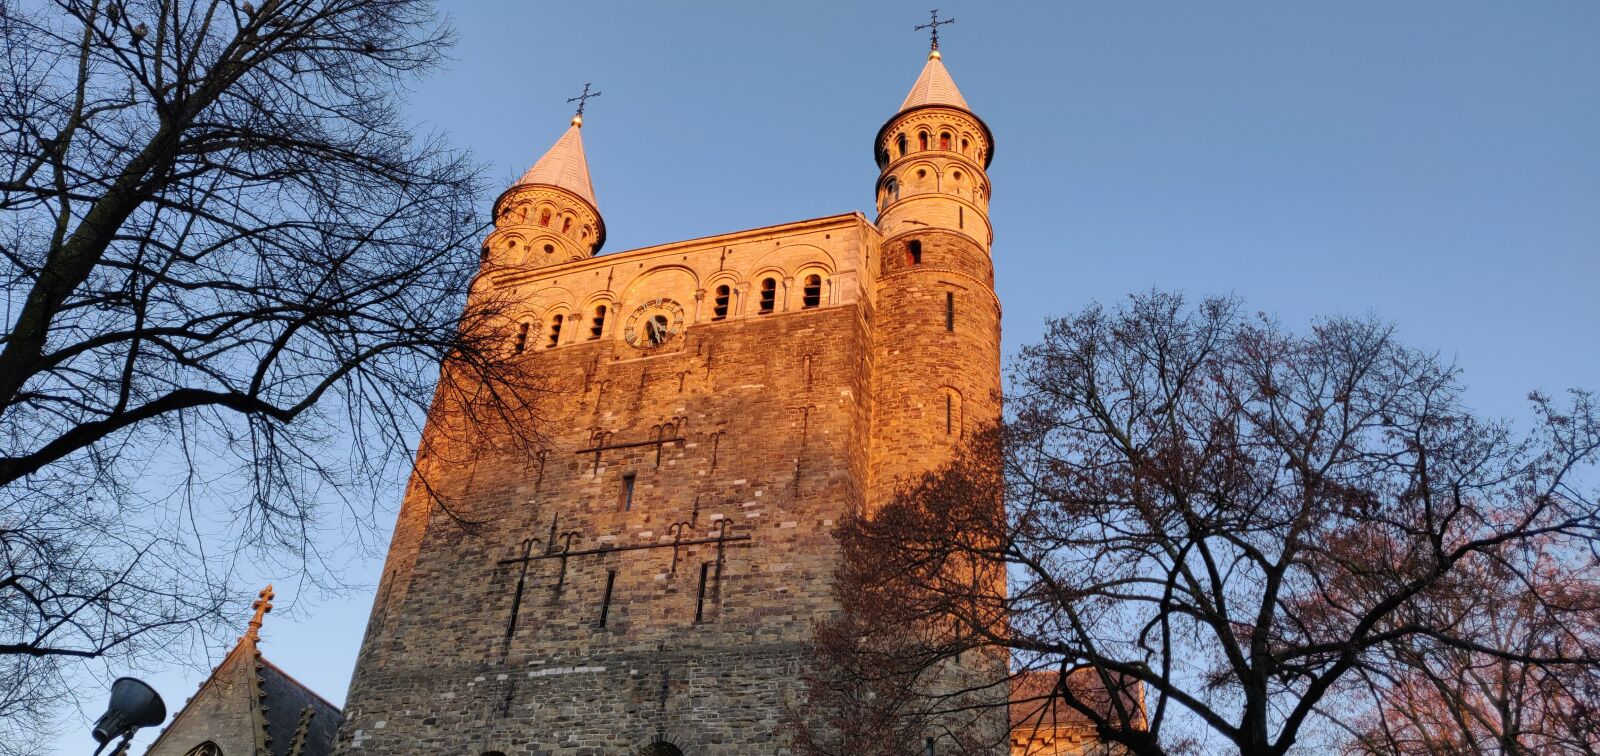 OnePlus 6 sample photo. Castle, evening sun, holiday photography